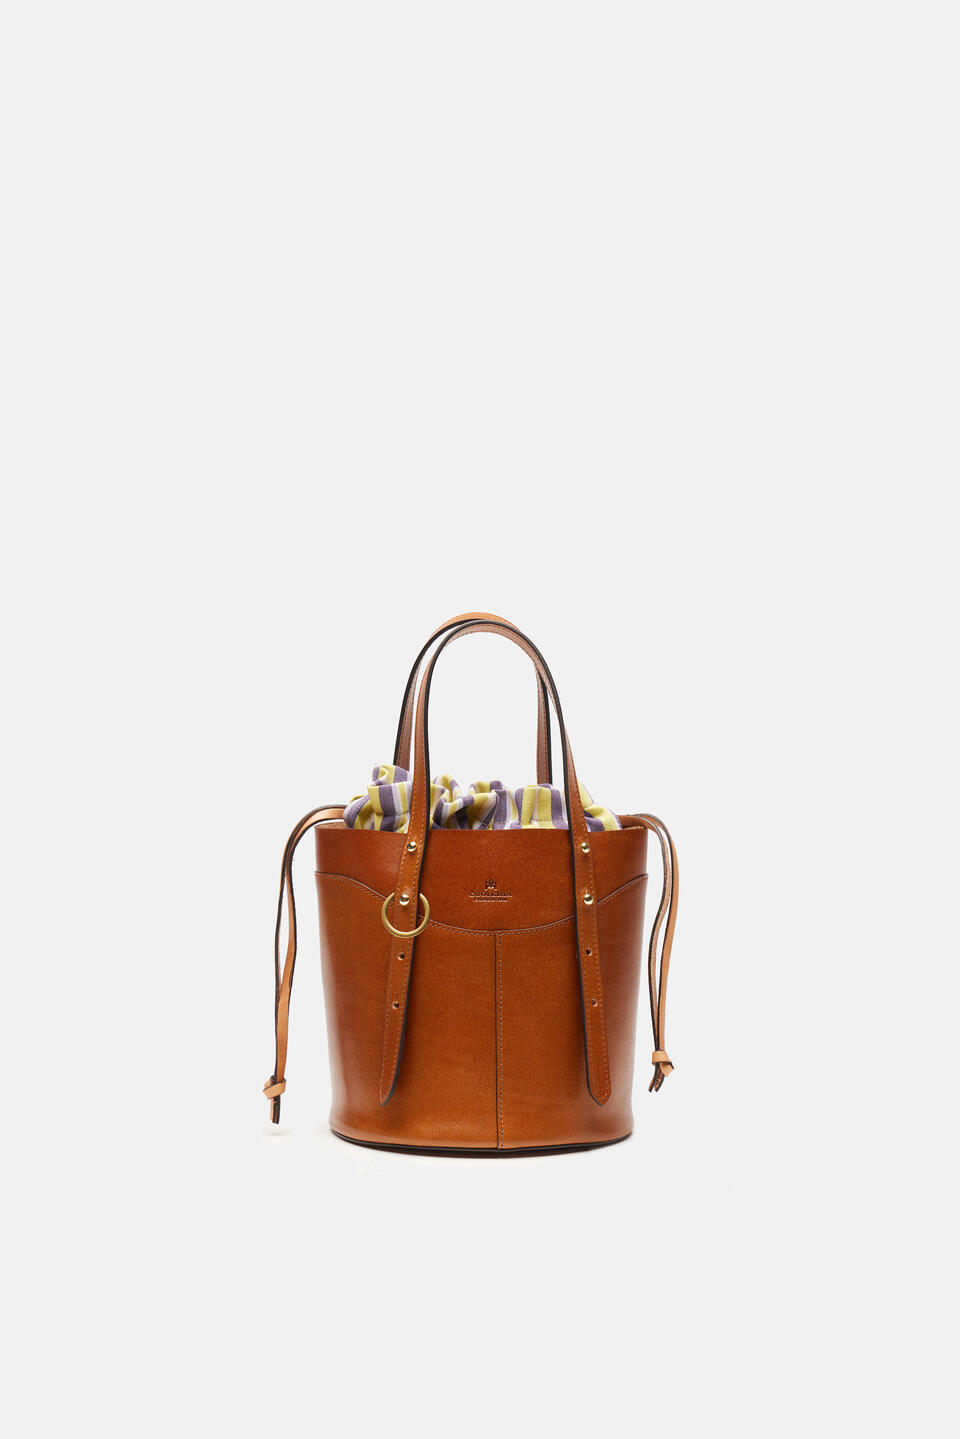 SMALL BUCKET Natural  - Bucket Bags - Women's Bags - Bags - Cuoieria Fiorentina